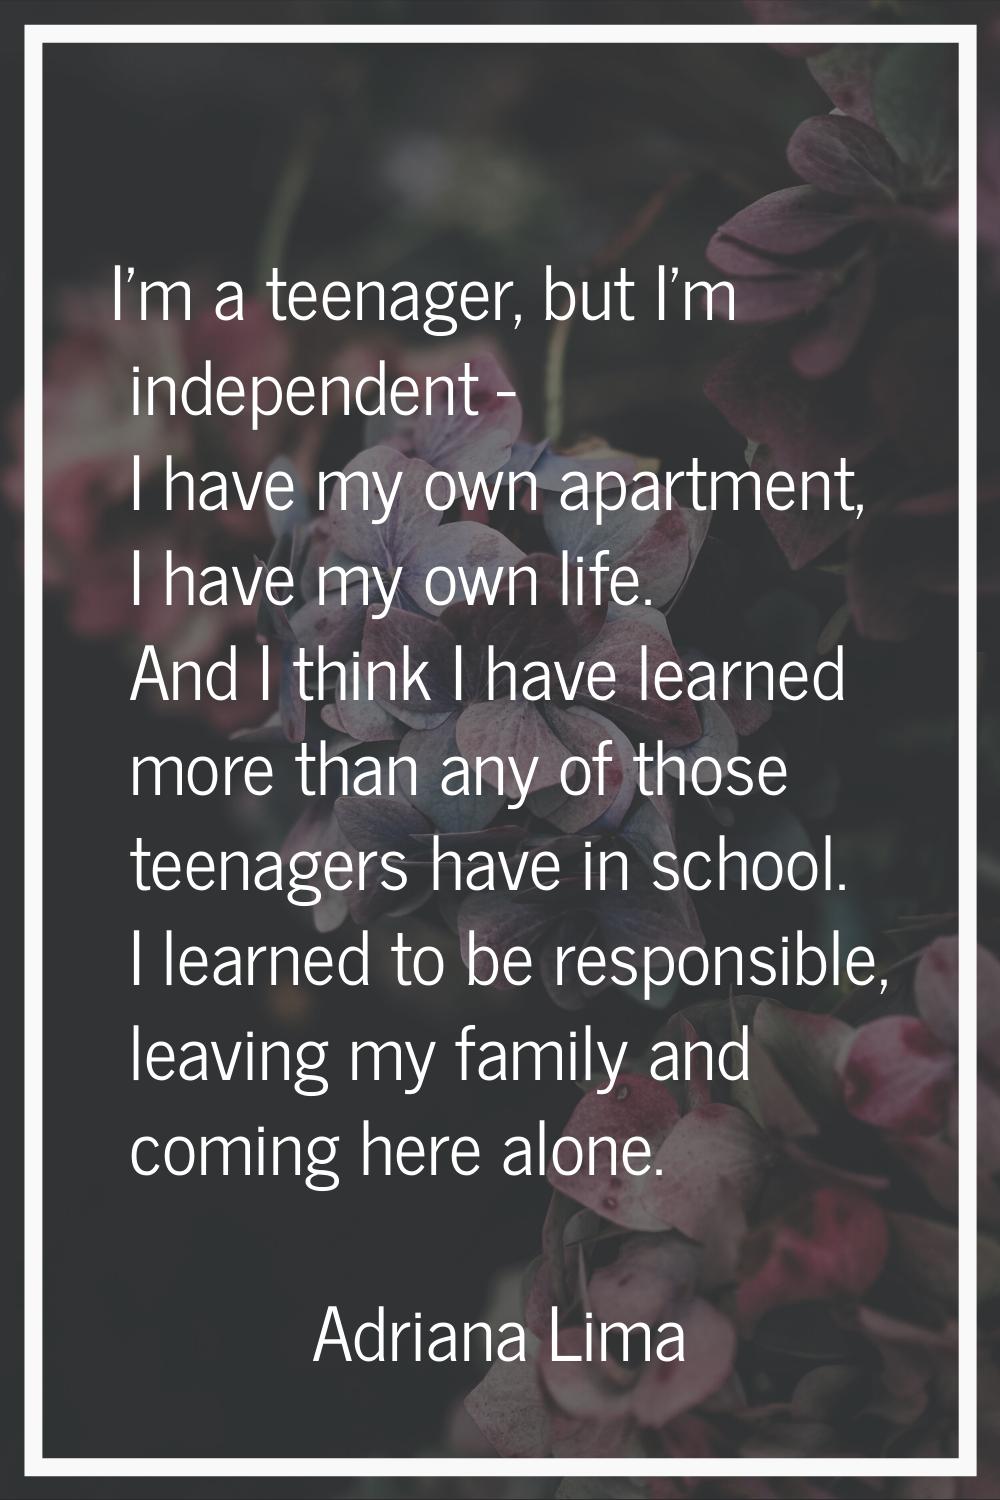 I'm a teenager, but I'm independent - I have my own apartment, I have my own life. And I think I ha